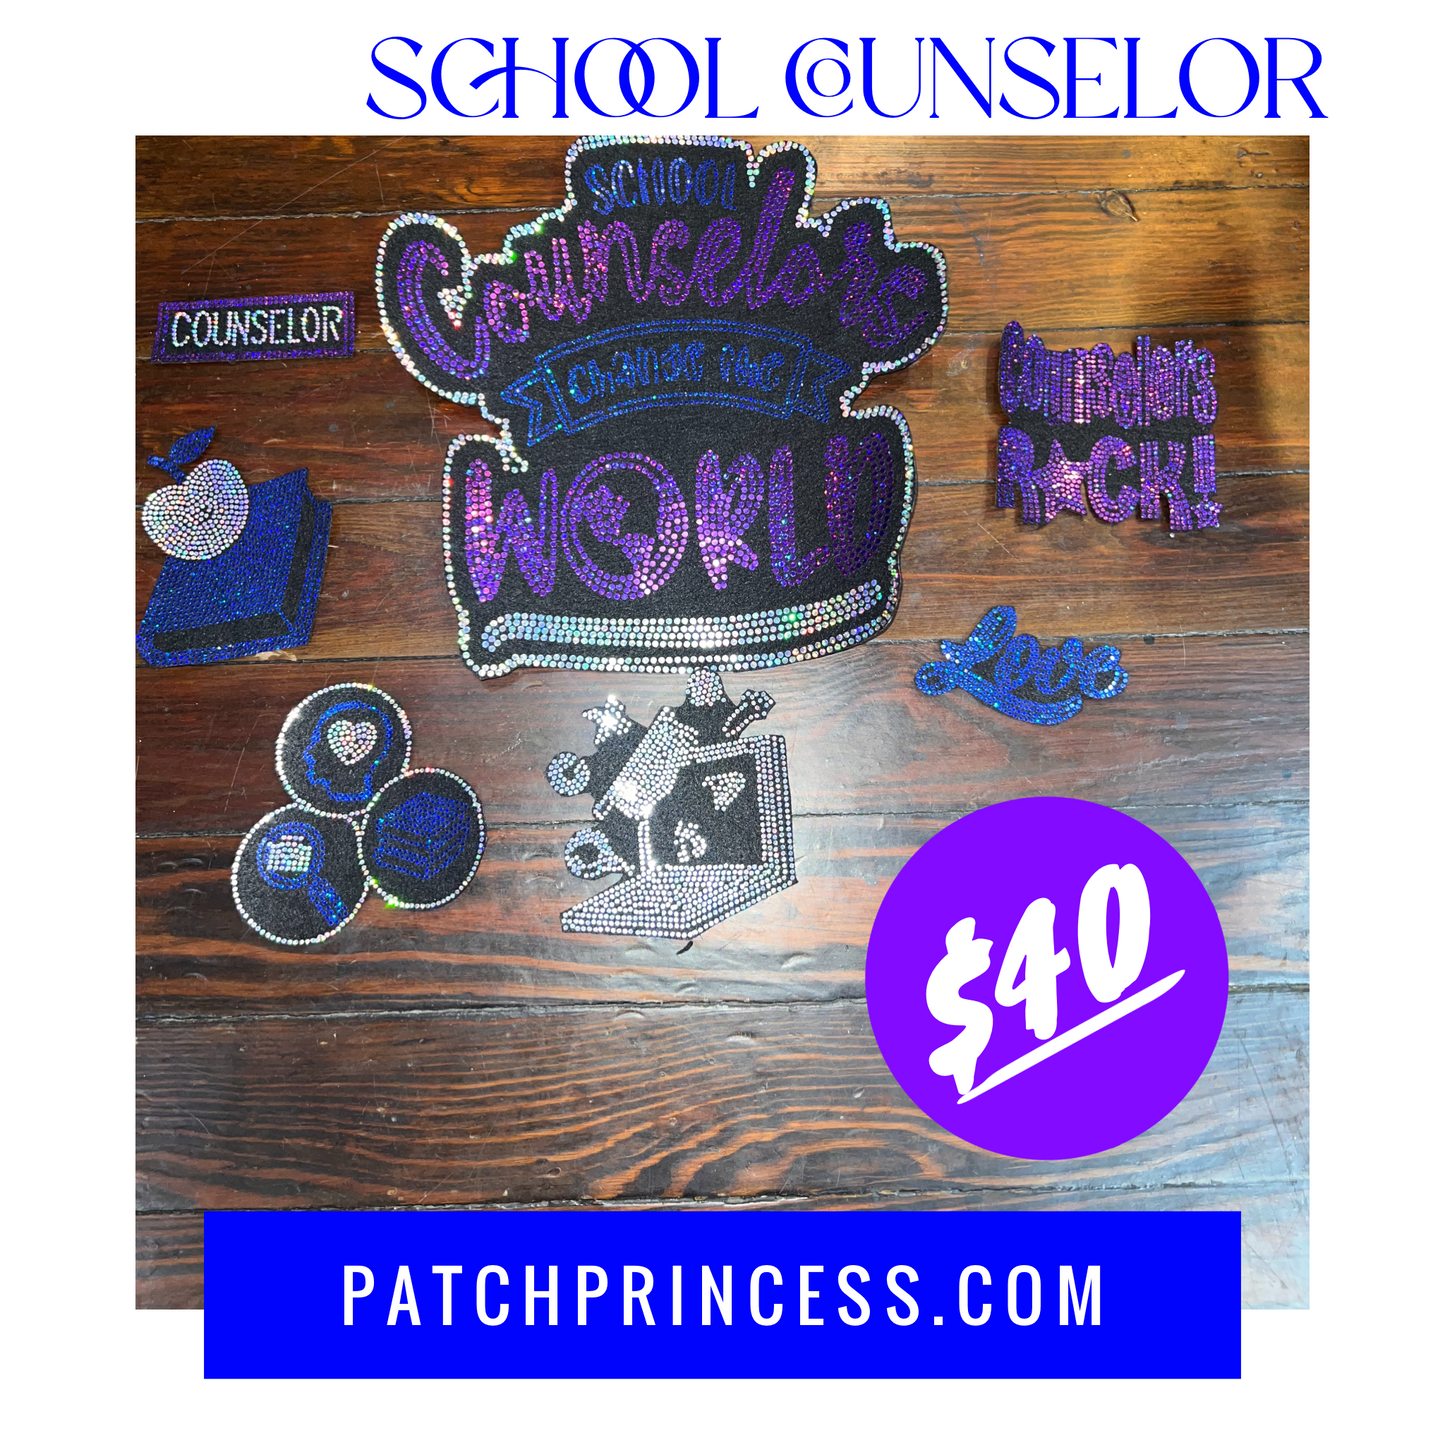 SCHOOL COUNSELOR 7 PATCH SET